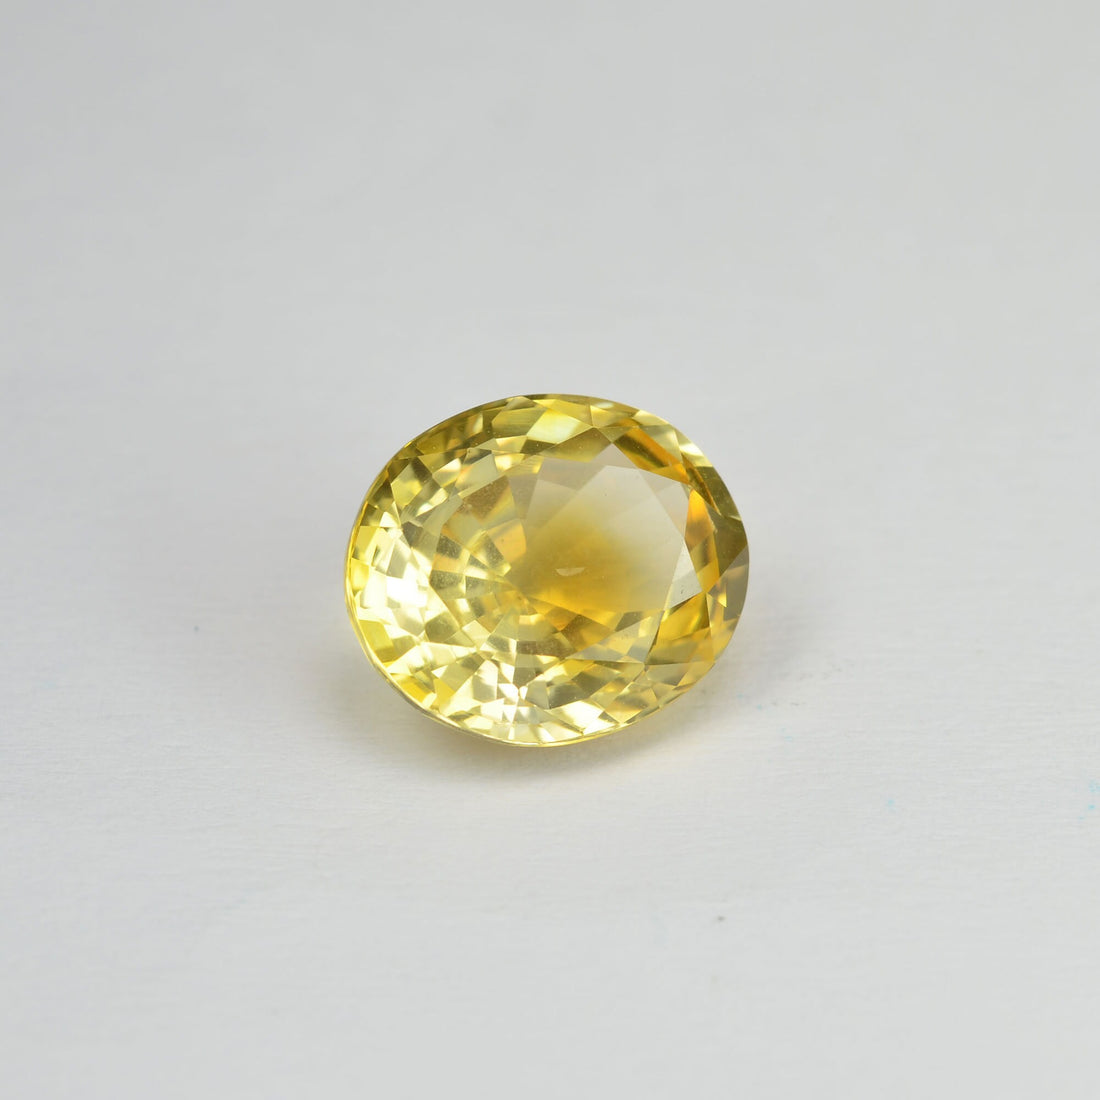 2.78 cts Natural Yellow Sapphire Loose Gemstone Oval Cut